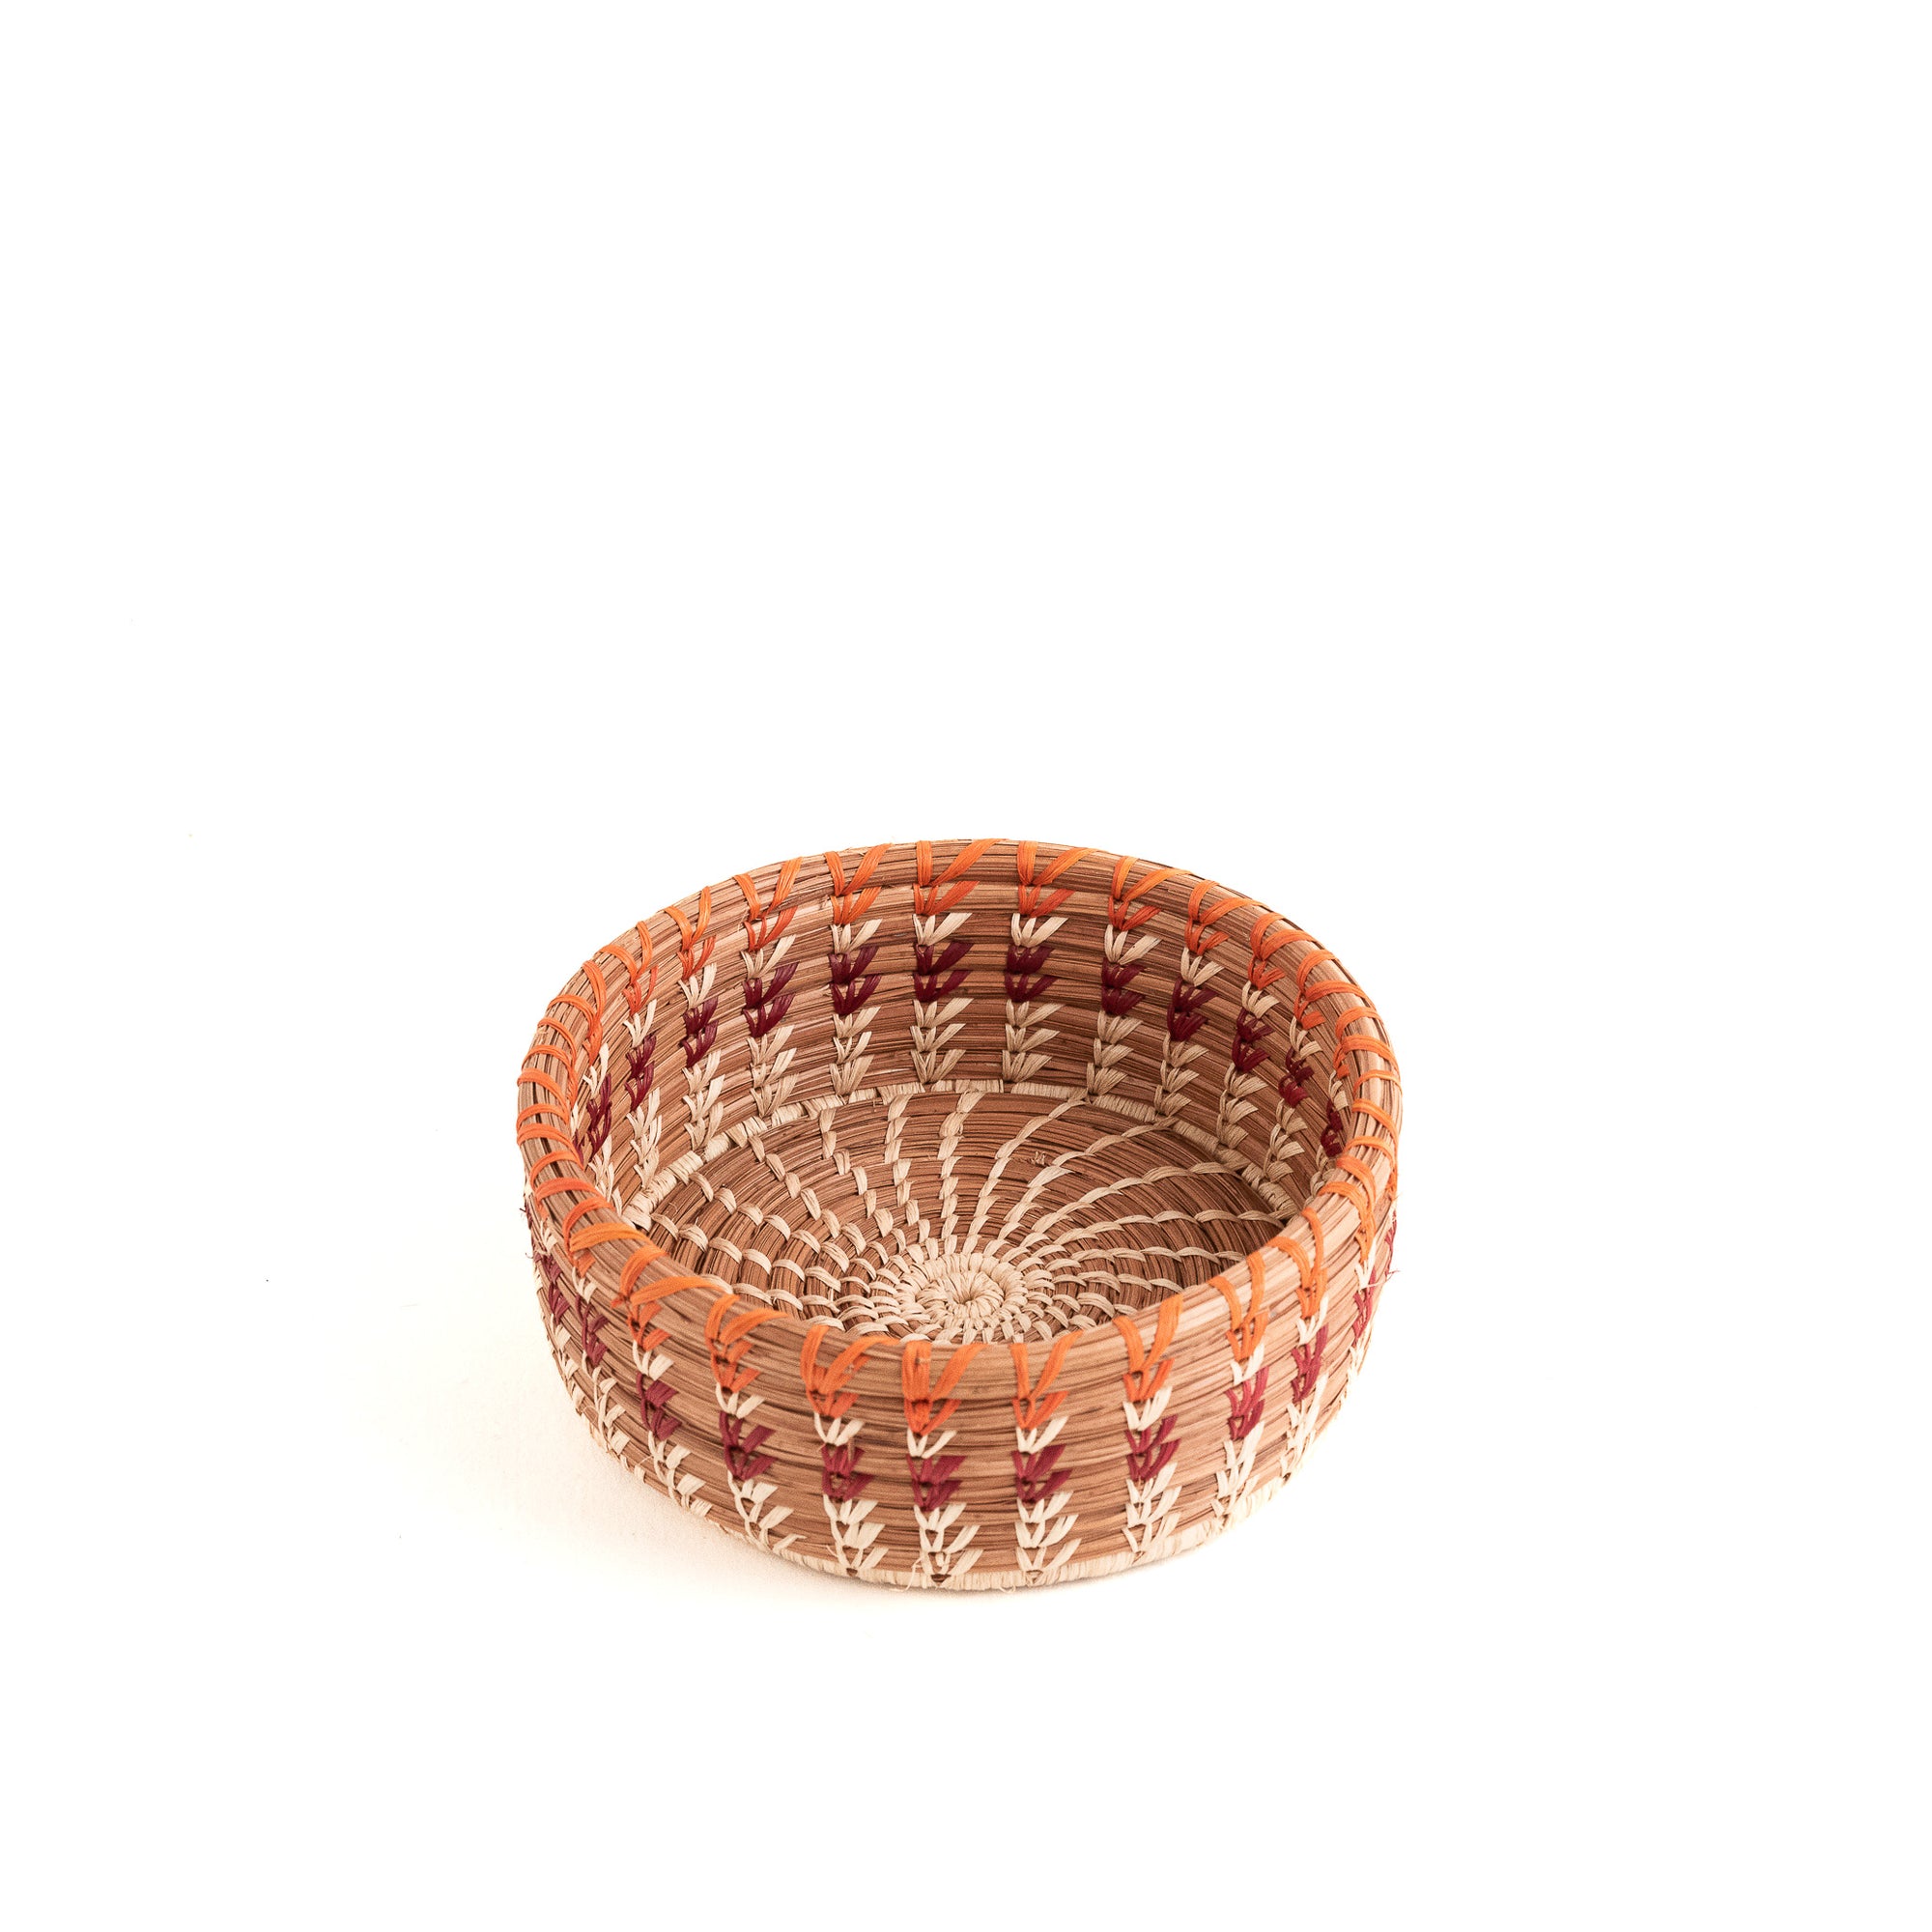 Small straight-sided pine needle basket with orange accent